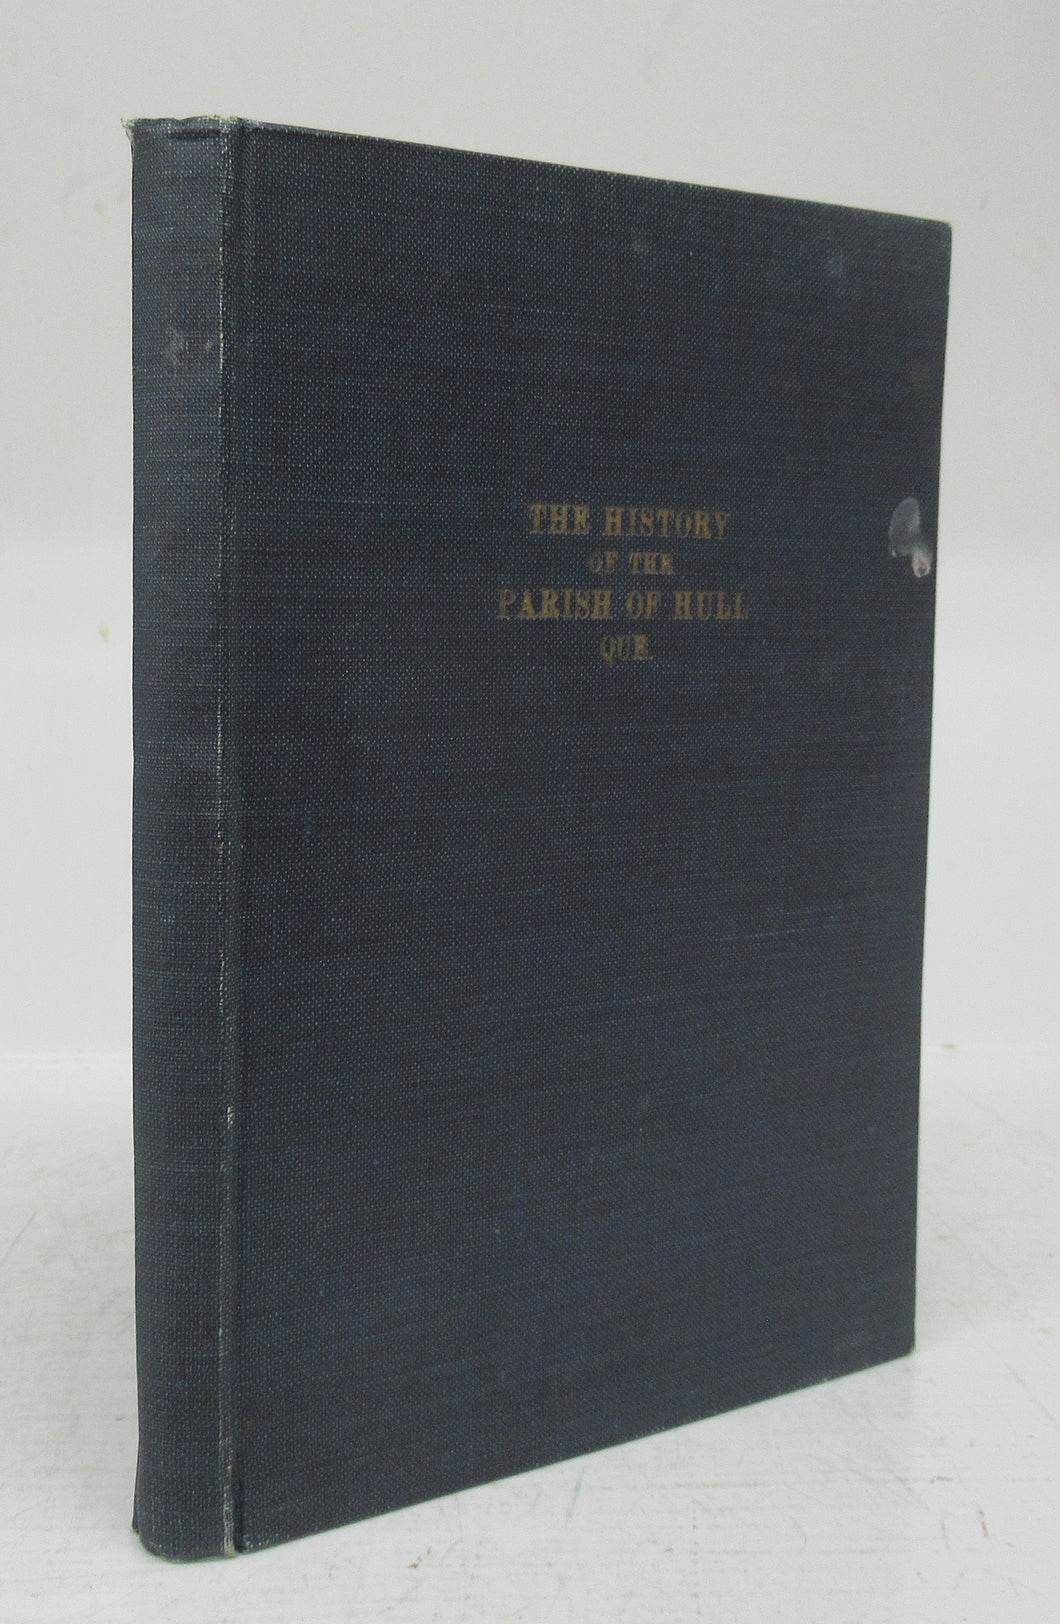 The History of the Parish of Hull Que. Being The Record of the First Hundred Years 1823-1923